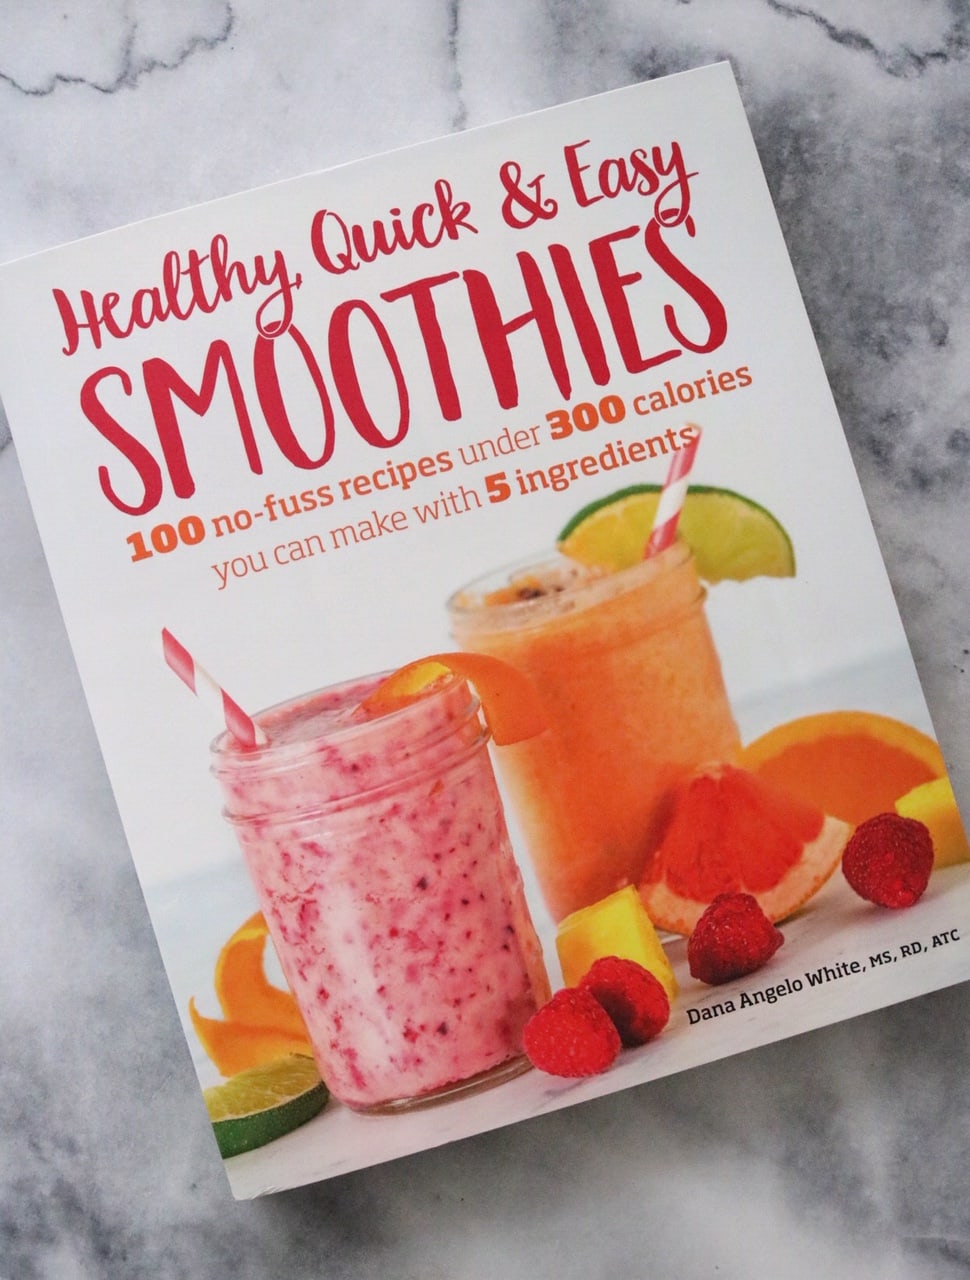 Healthy, Quick & Easy Smoothies